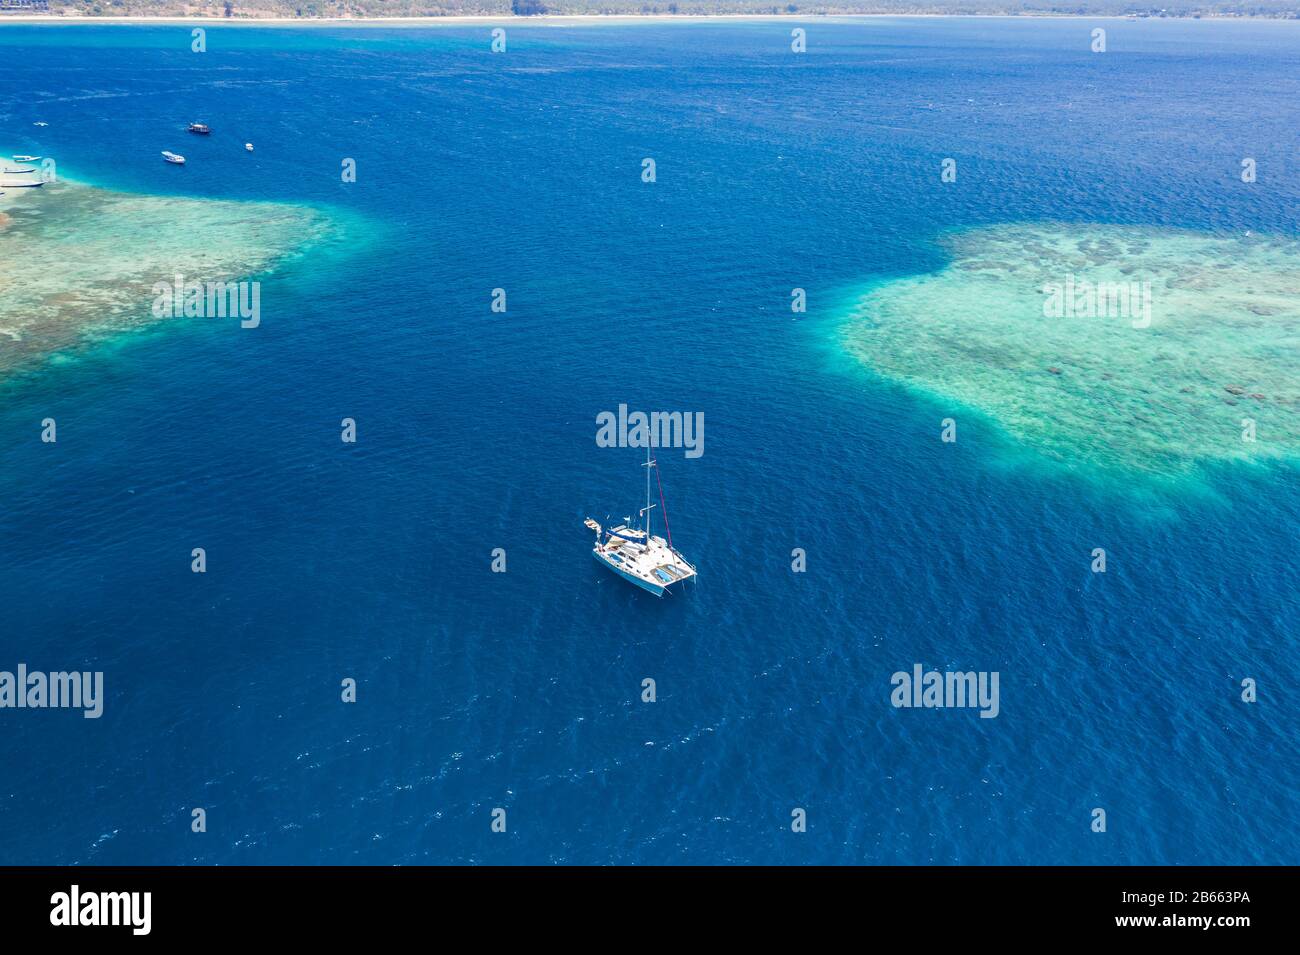 Aerial view of a sailboat next to a large, offshore tropical coral reef Stock Photo